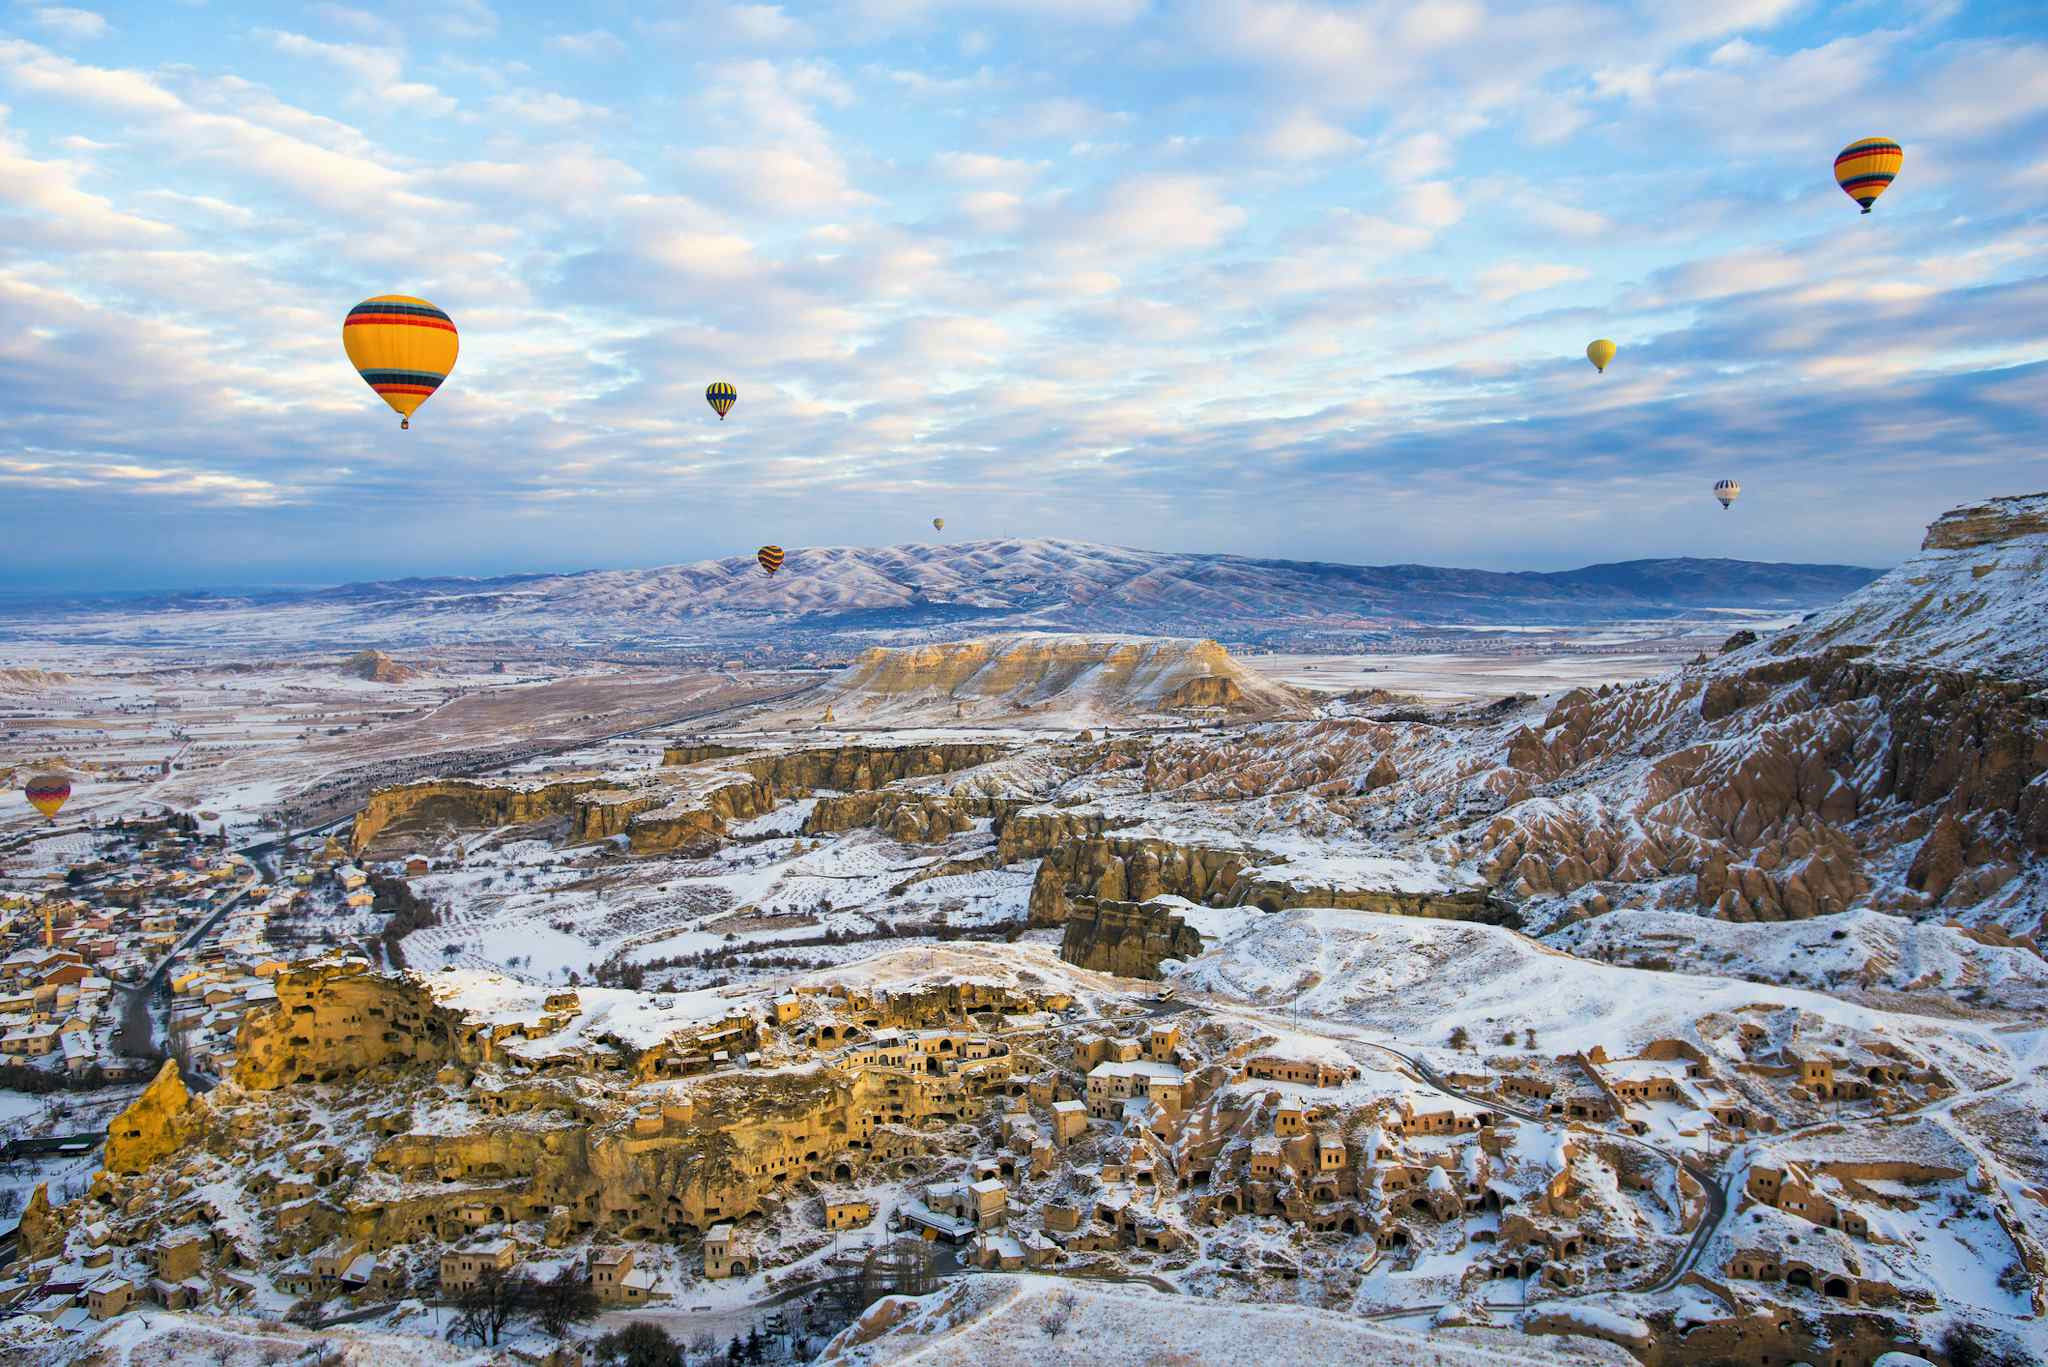 Cappadocia, Turkey, in Winter with Snow and Air Balloon. Photo: GettyImages-1146681685
